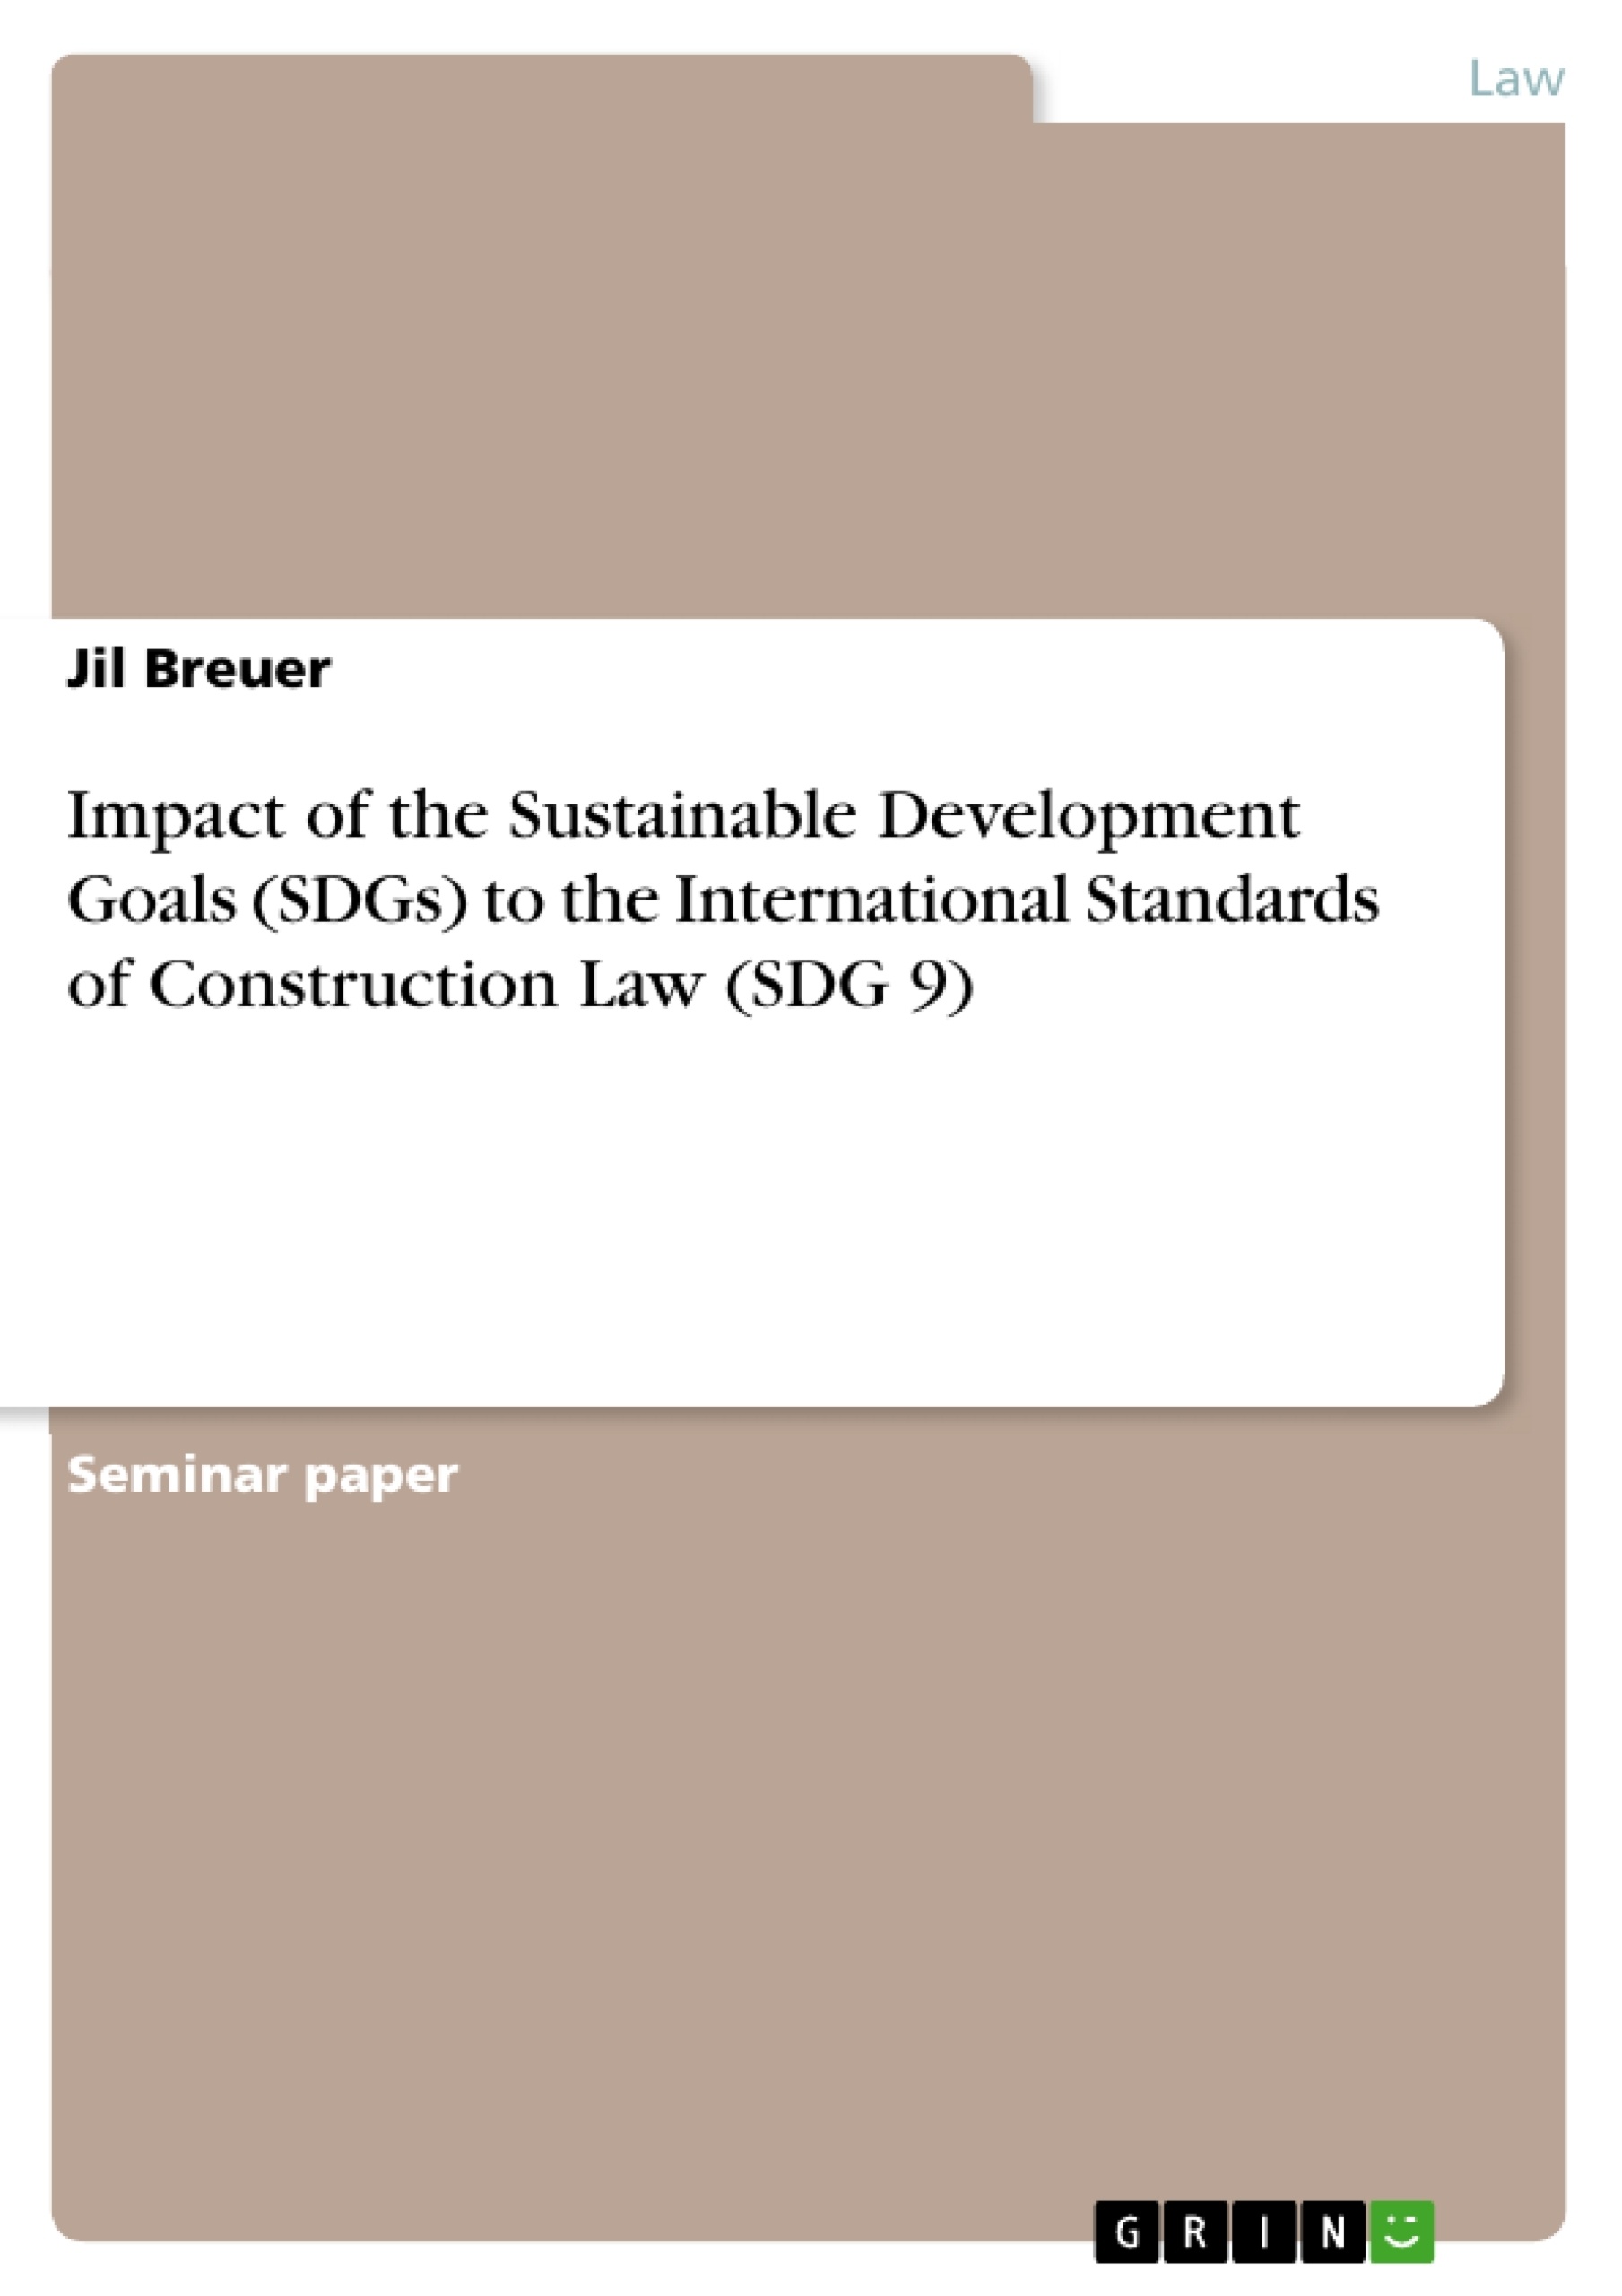 Titre: Impact of the Sustainable Development Goals (SDGs) to the International Standards of Construction Law (SDG 9)